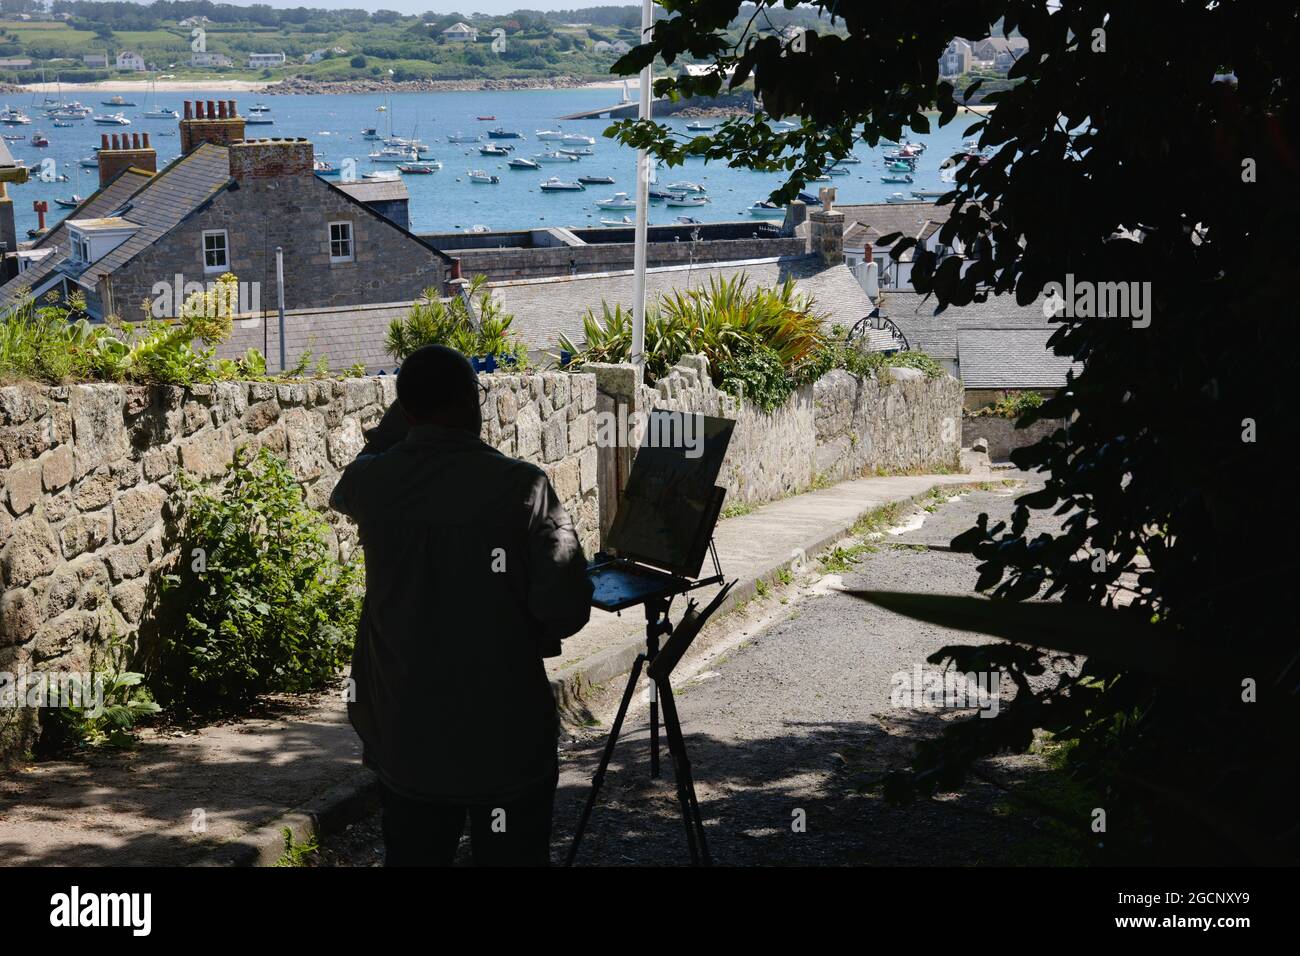 A painter on Garrison Hill, Hugh Town, St Mary's island, Isles of Scilly, Cornwall, England, UK, July 2021 Stock Photo